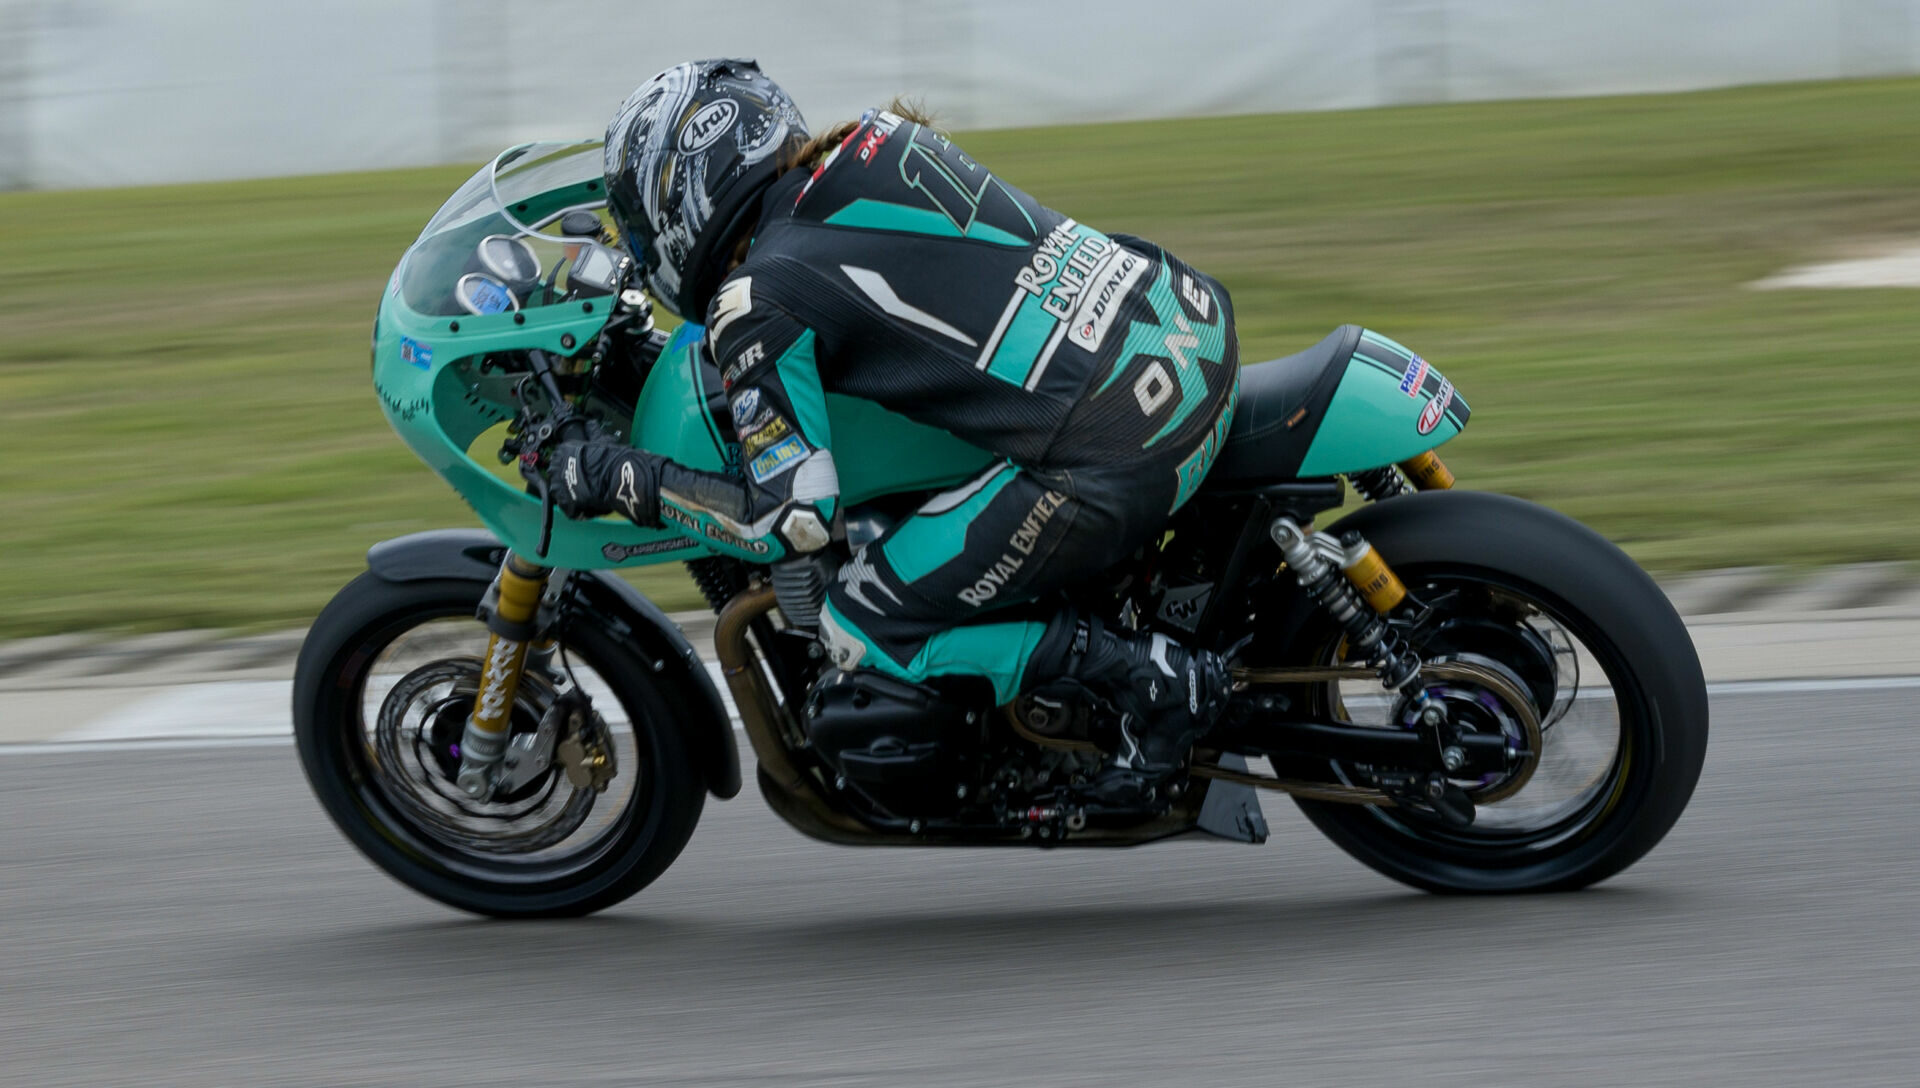 Kayleigh Buyck (16) in action at Barber Motorsports Park. Photo courtesy Royal Enfield North America.